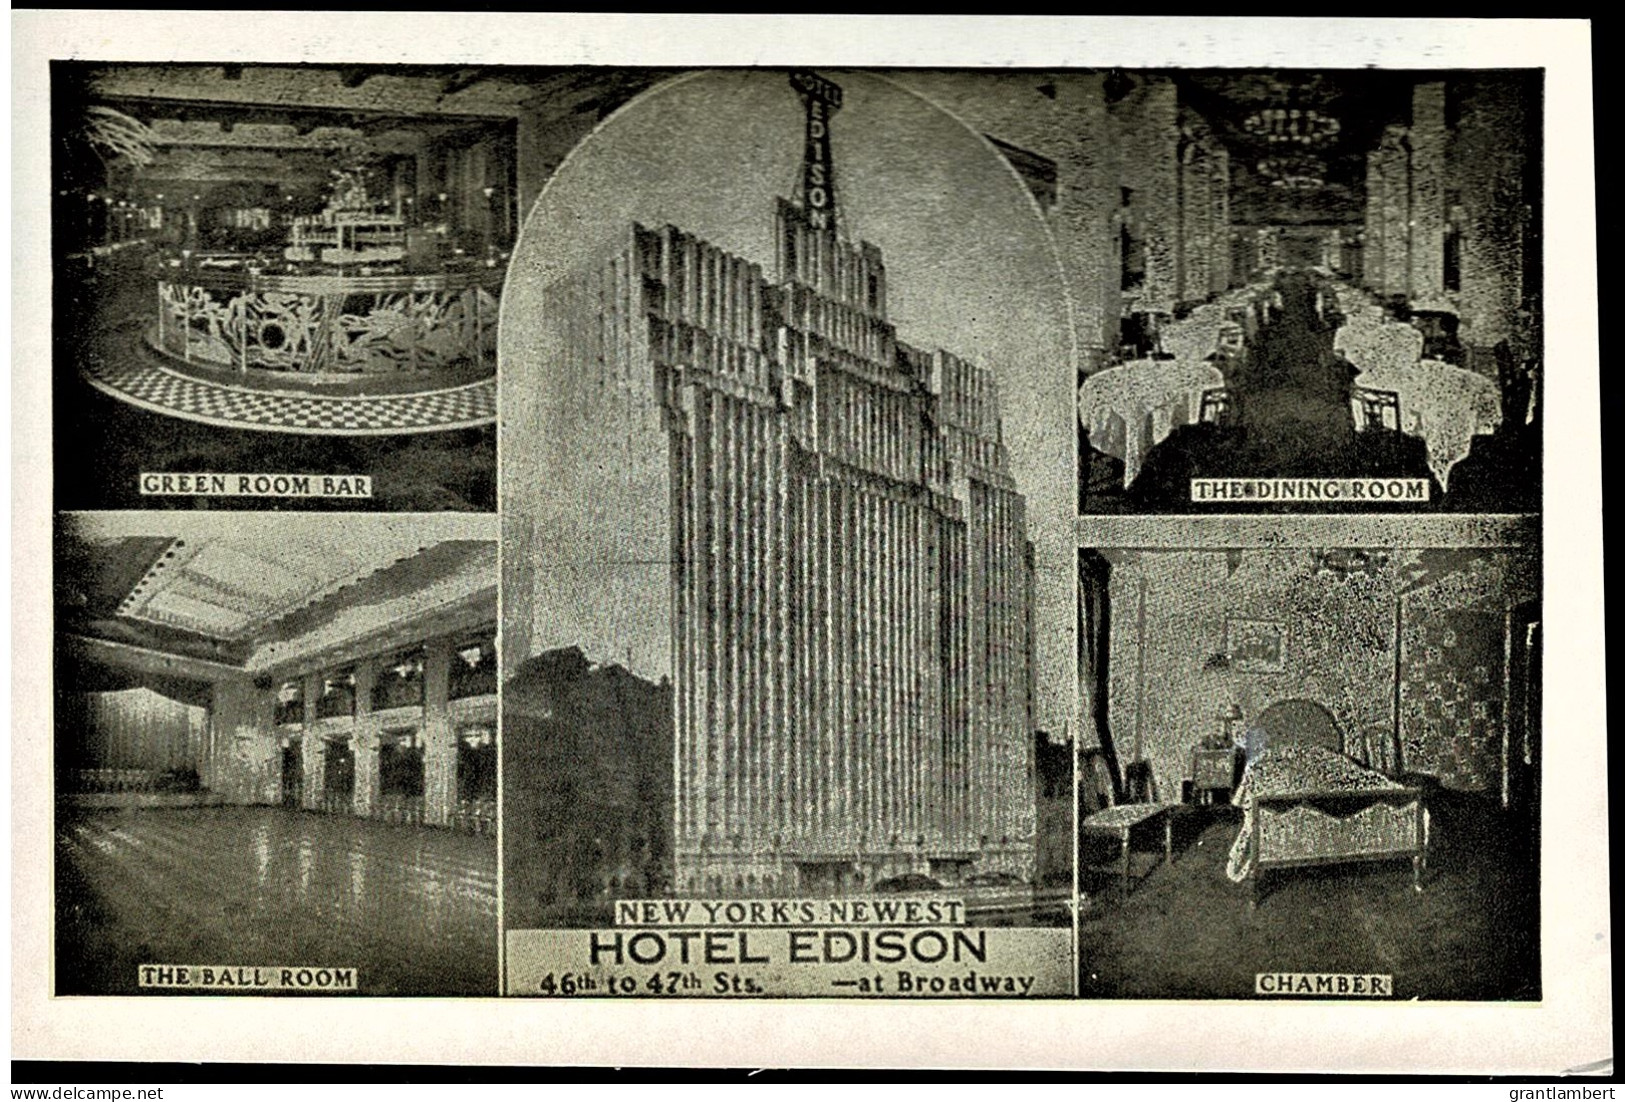 Hotel Edison, At Broadway, 46th To 47th St. New York - Unused - Broadway